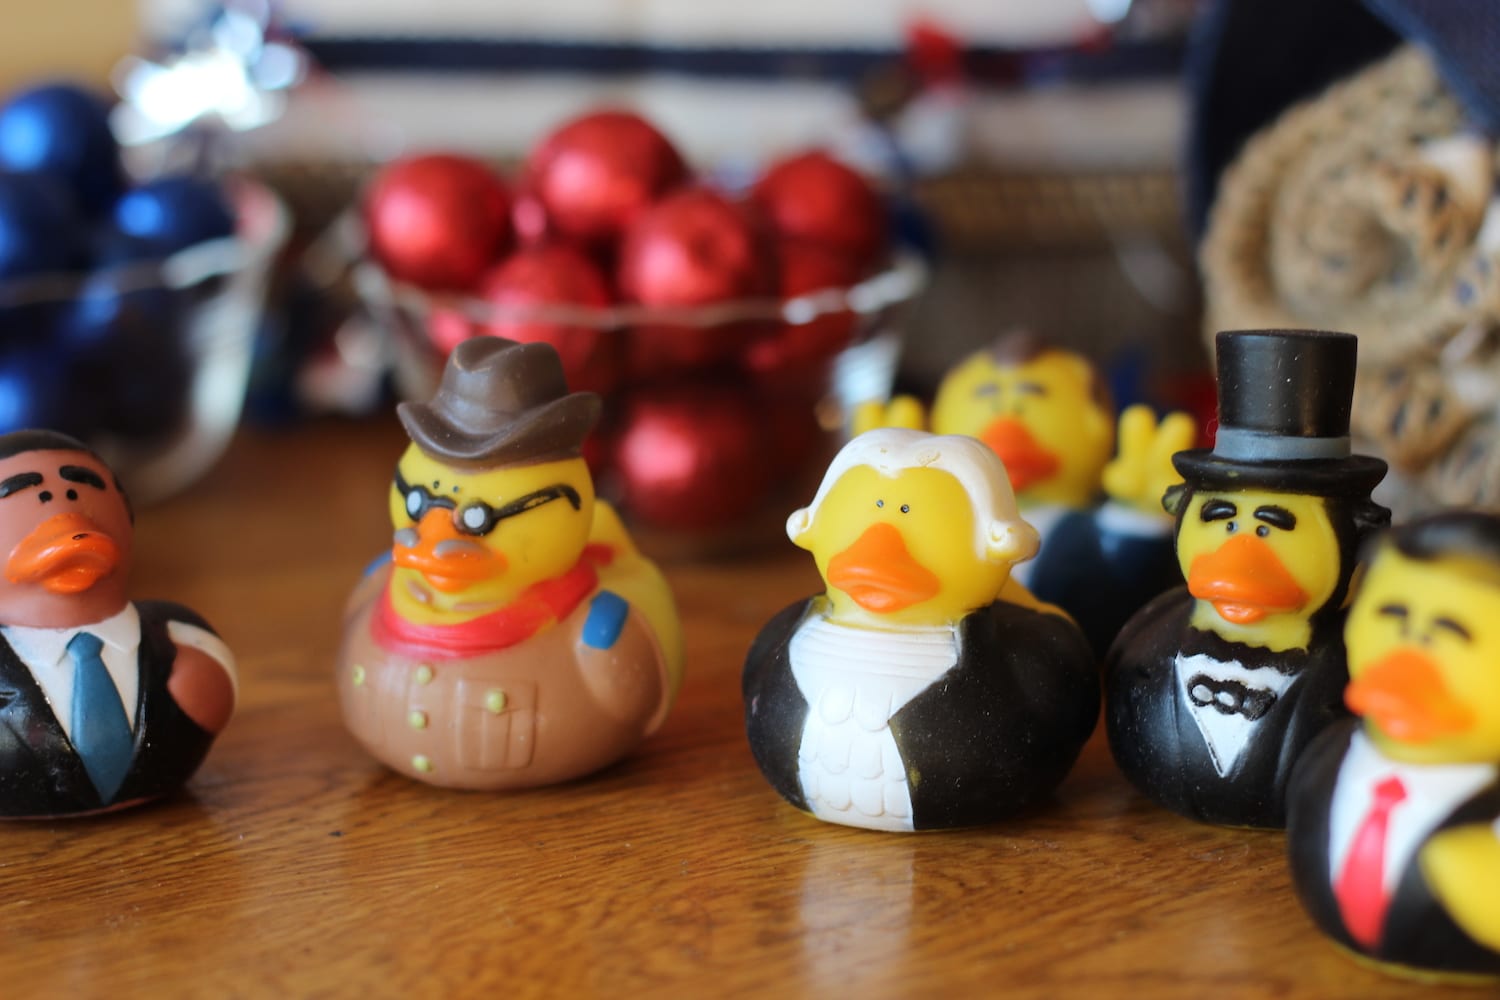 Presidential ducks and candy